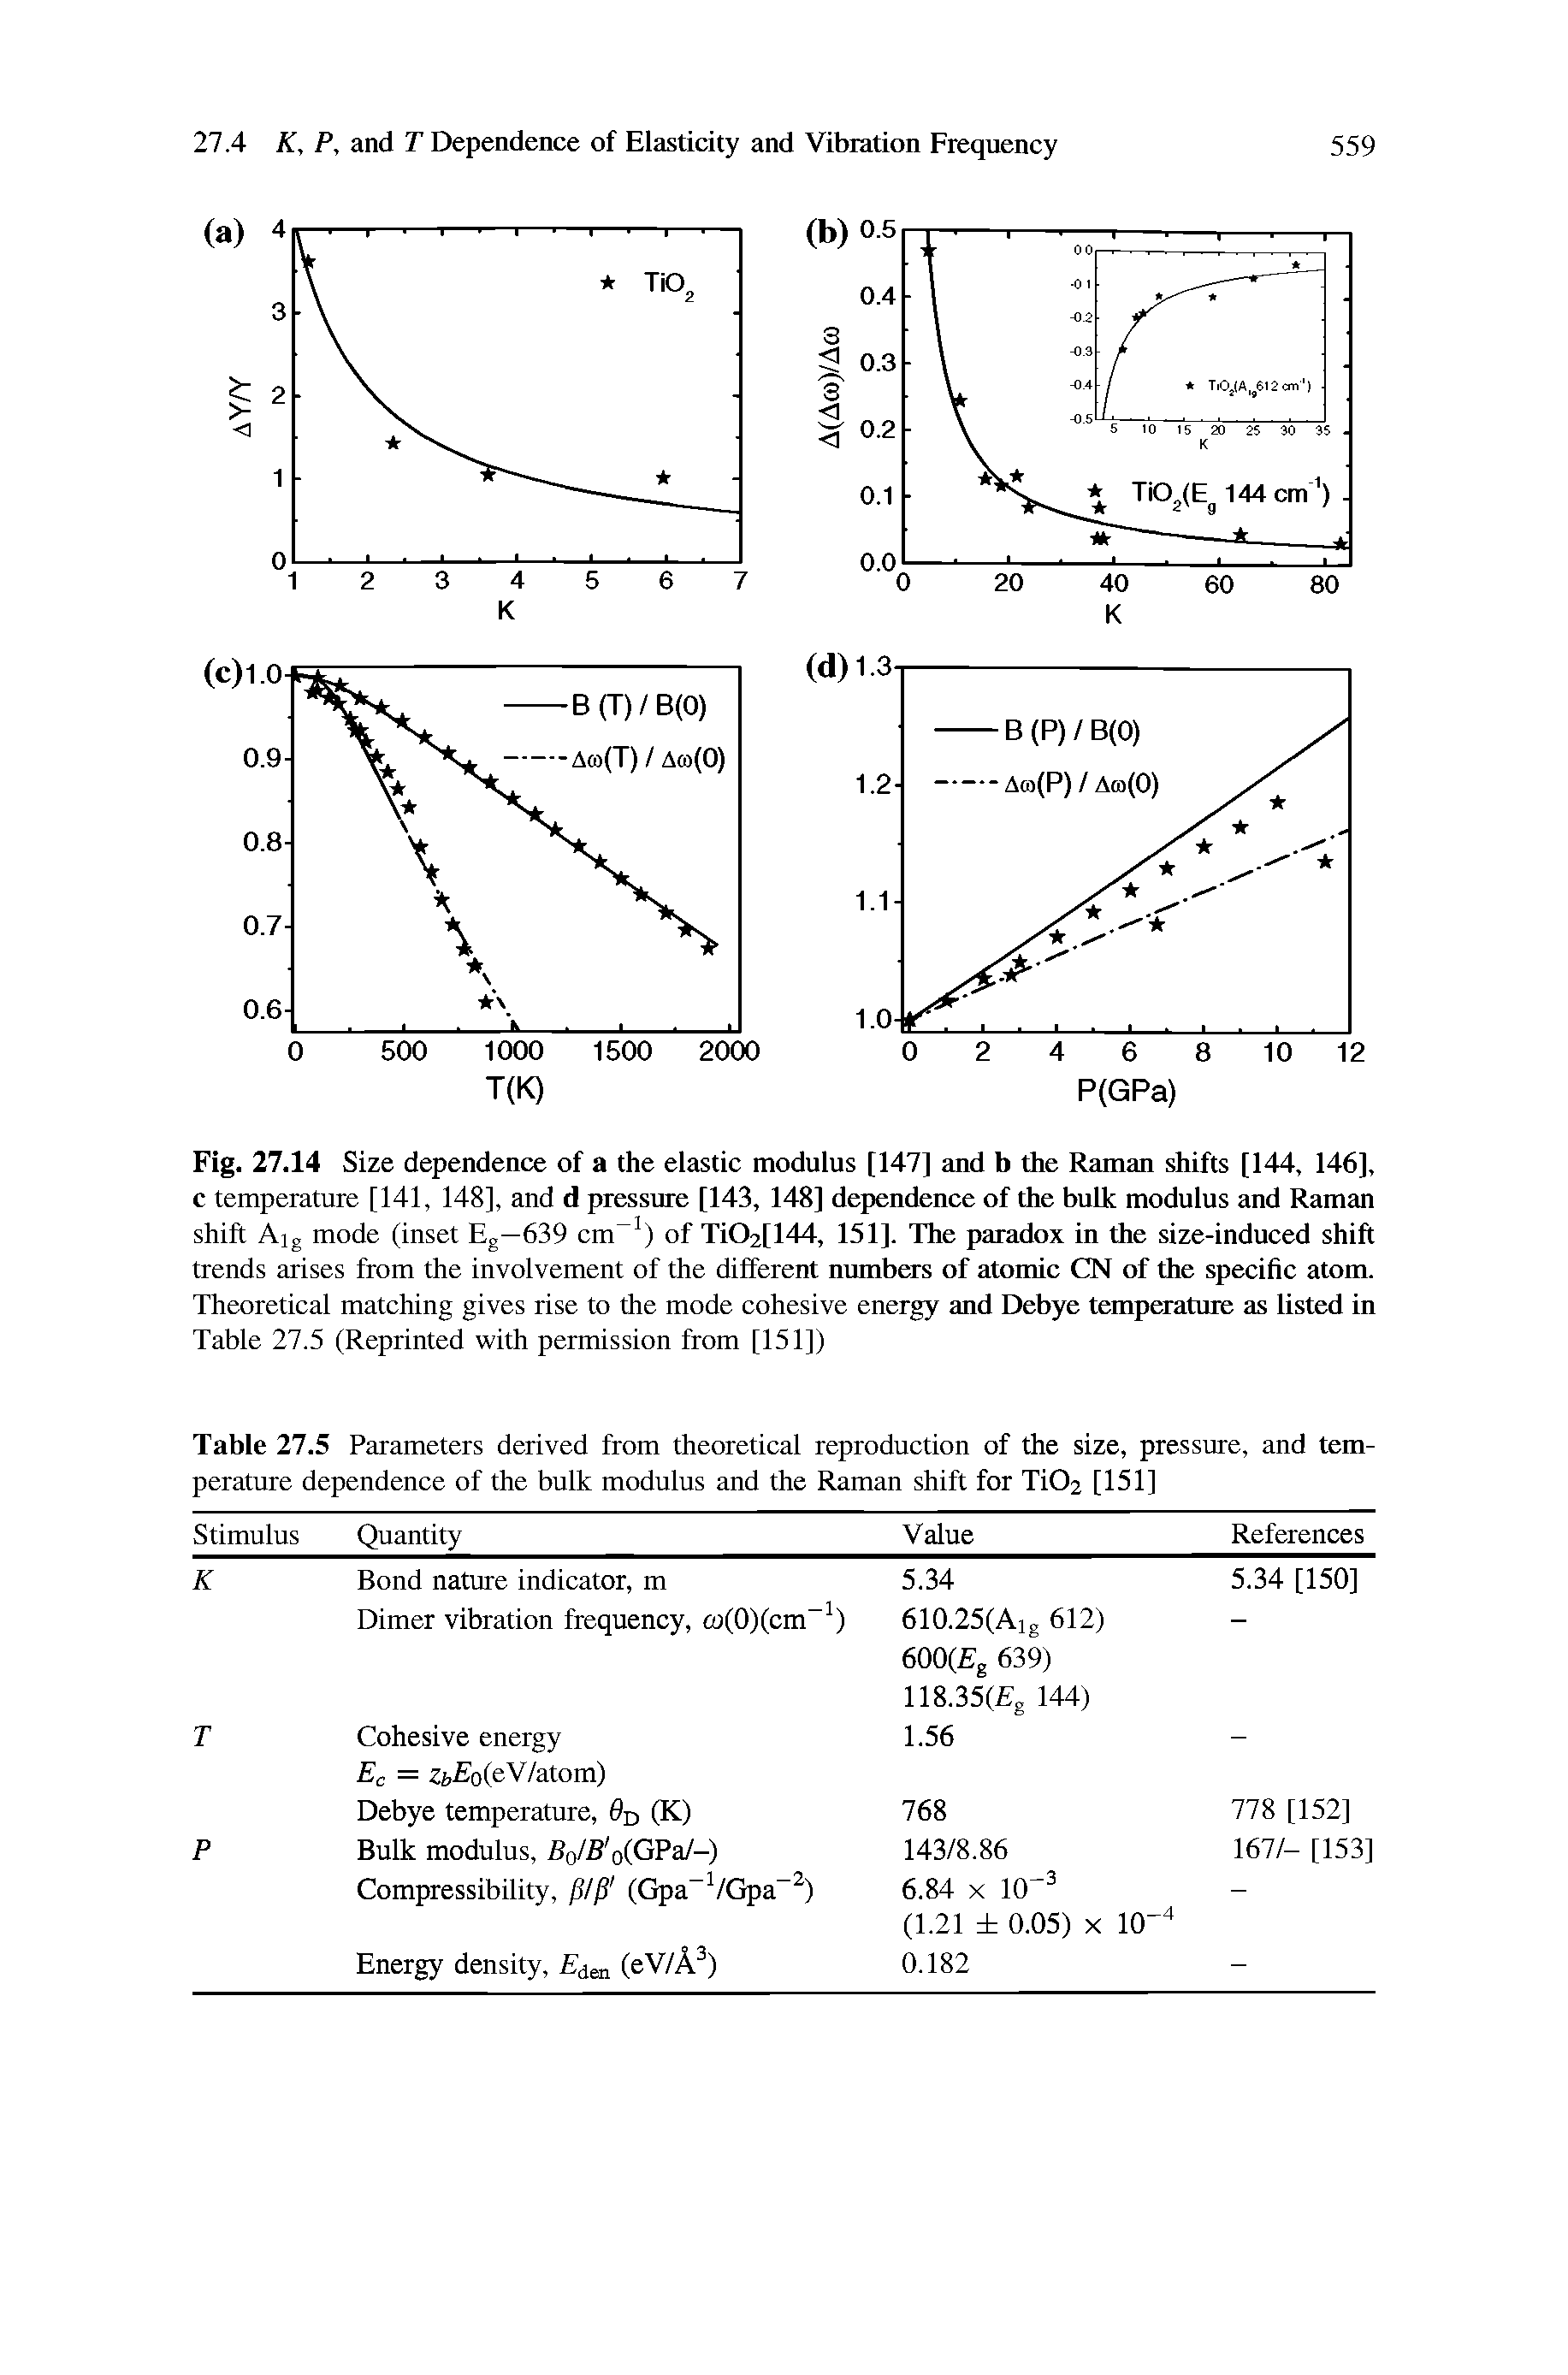 Table 27.5 Parameters derived from theoretical reproduction of the size, pressure, and temperature dependence of the bulk modulus and the Raman shift for TiOa [151]...